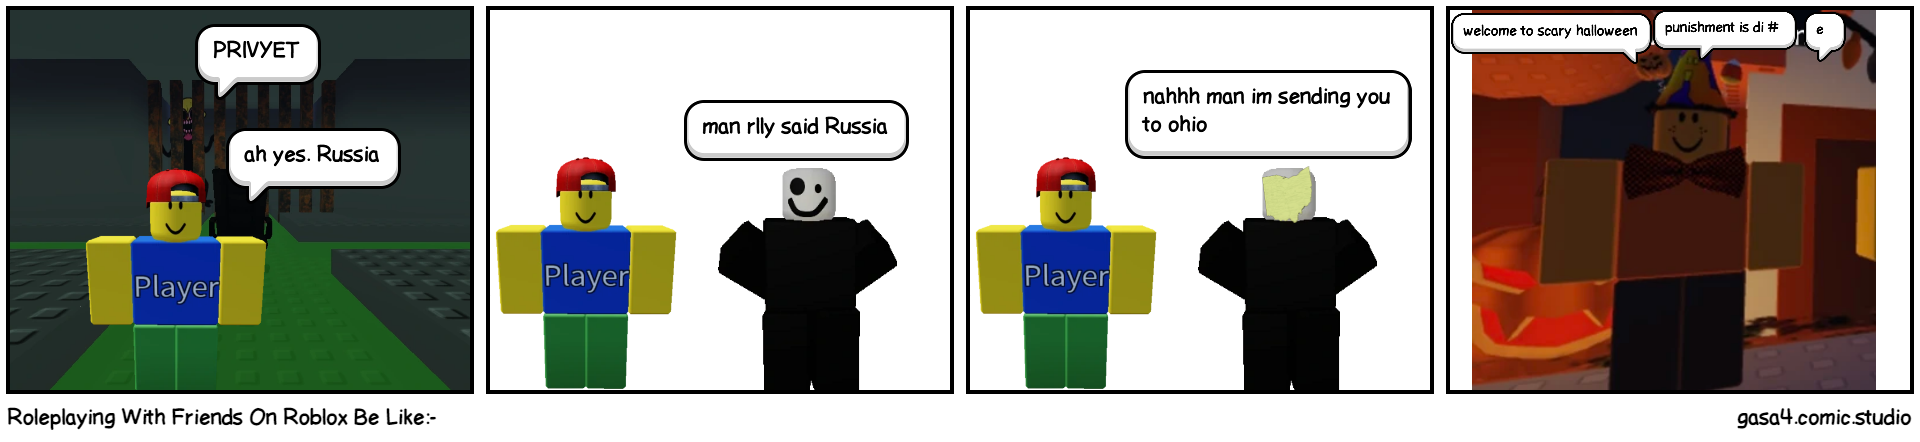 Roleplaying With Friends On Roblox Be Like:-